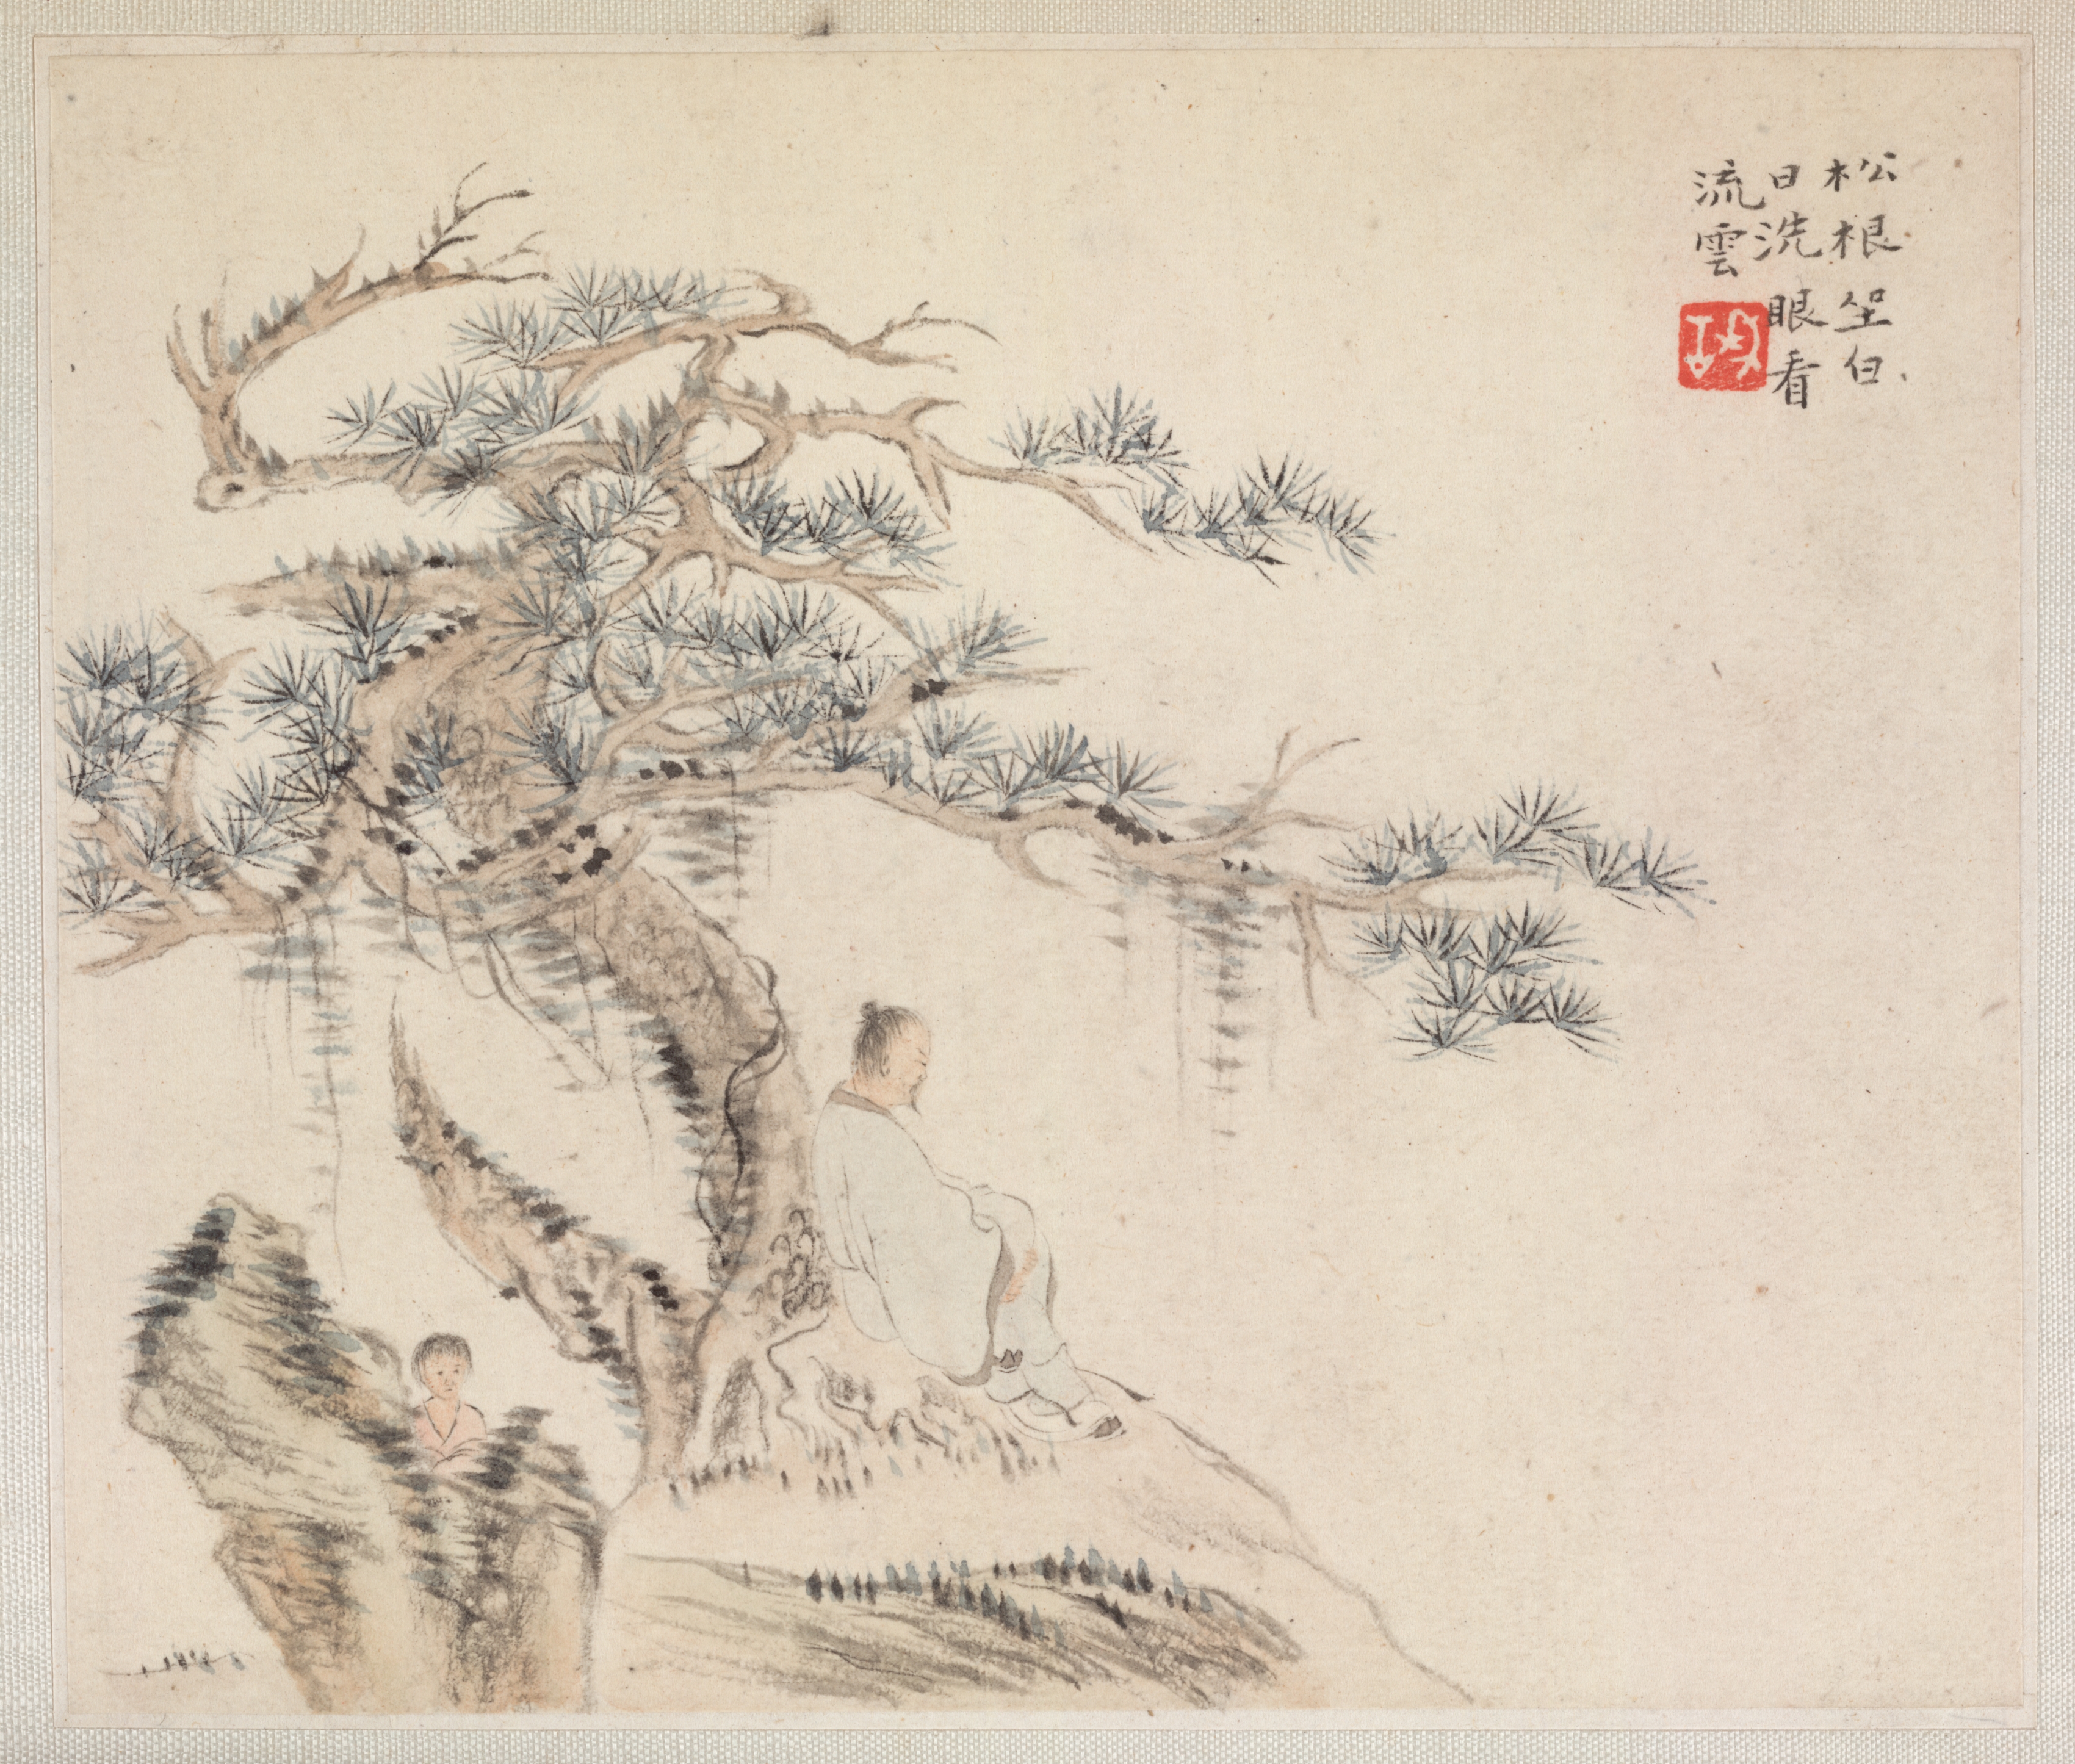 Album of Landscape Paintings Illustrating Old Poems: Scholar under a Pine Tree